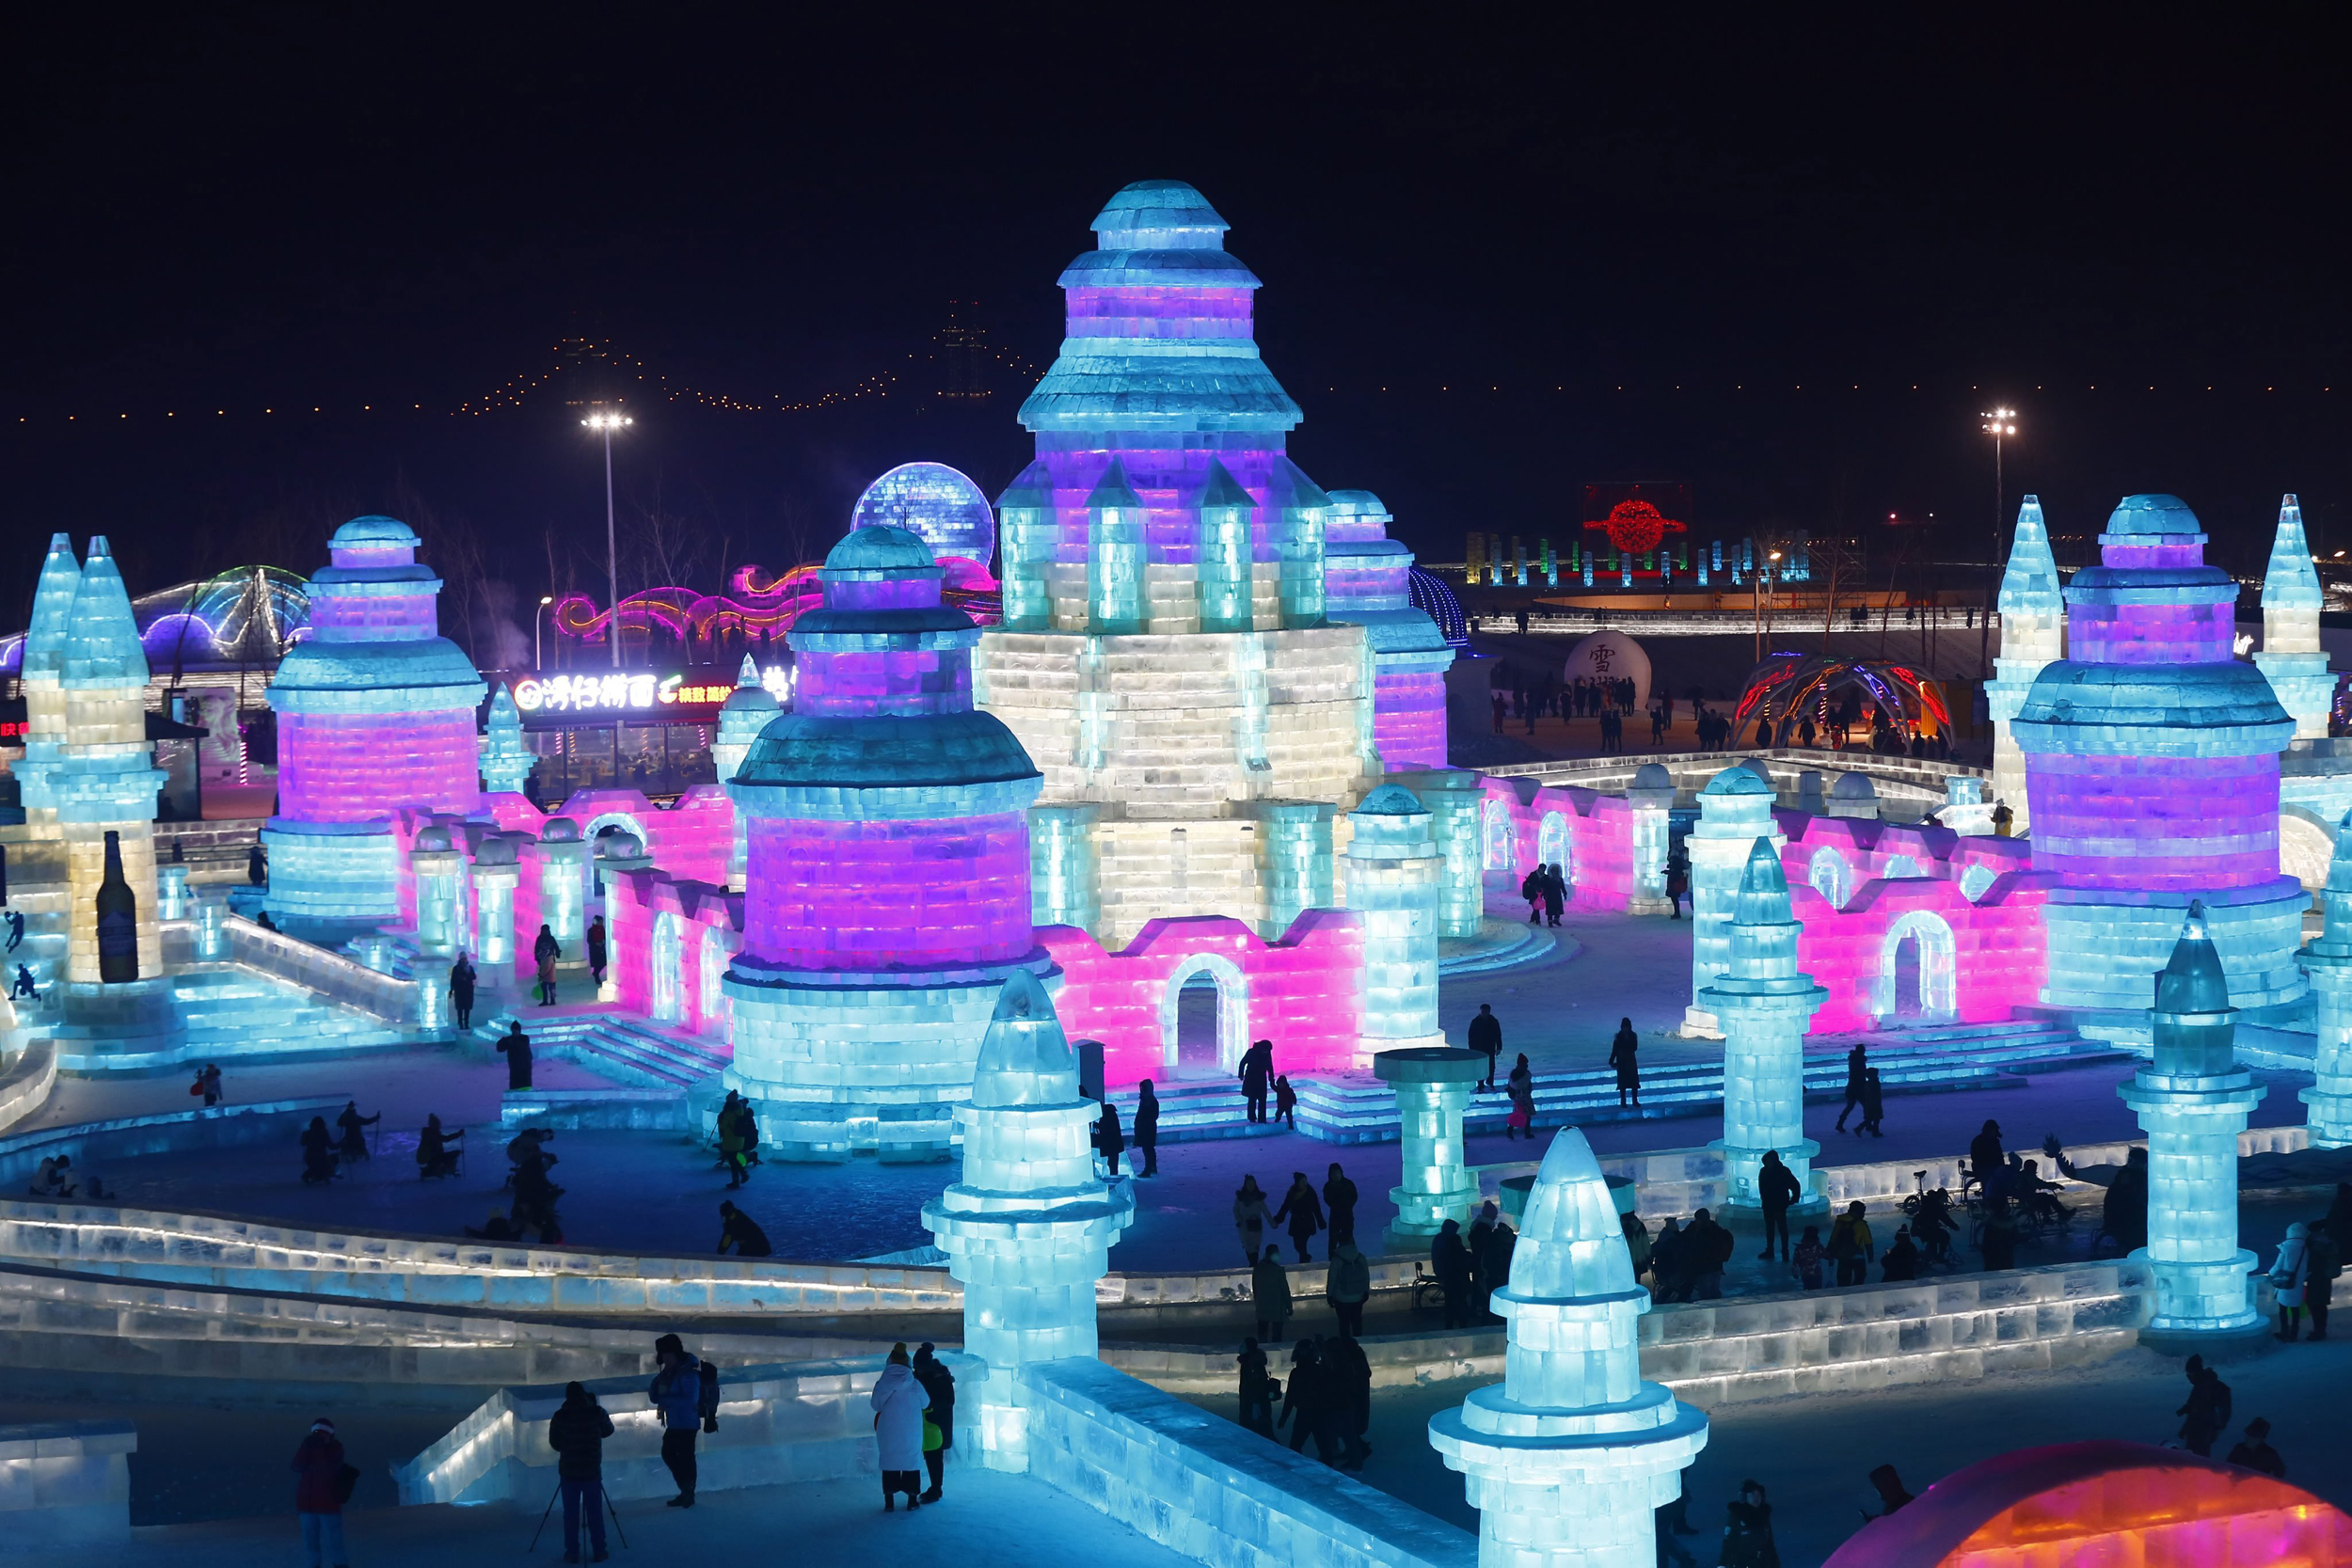 Captivating ice sculpture at a competition, beautifully illuminated and attracting spectators